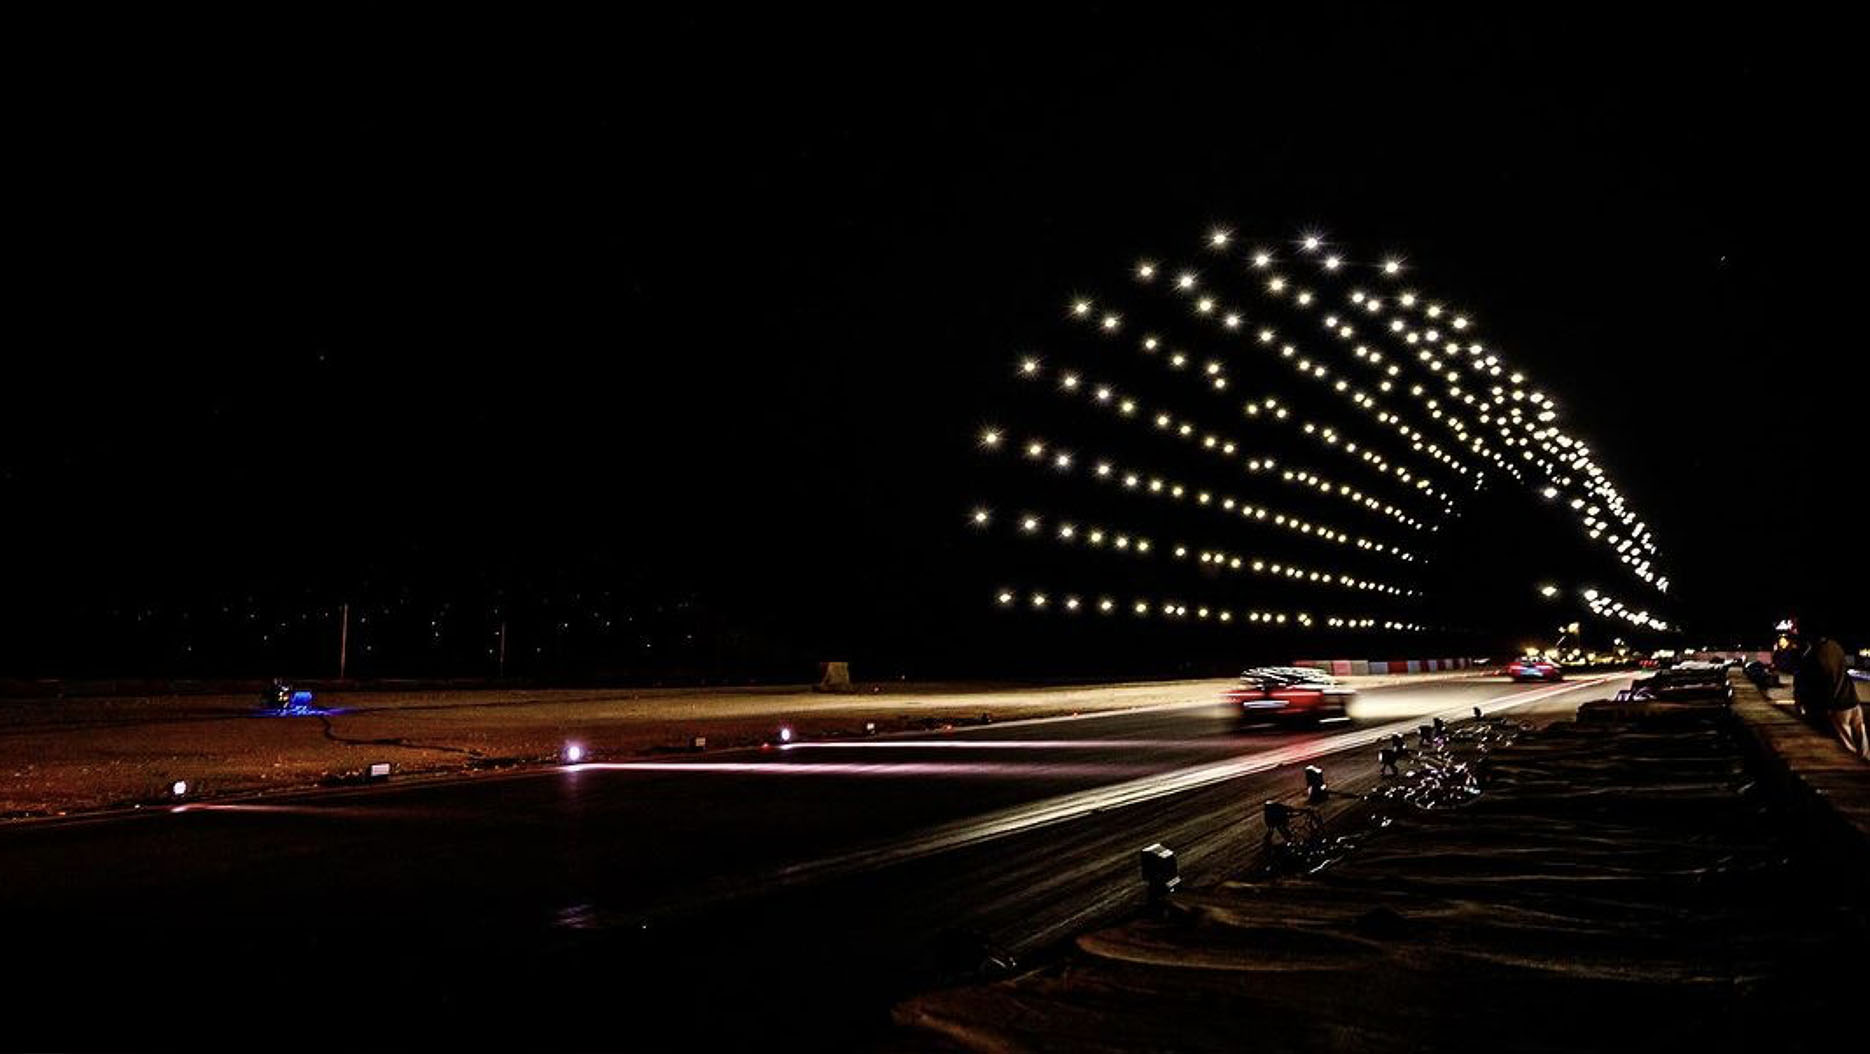 A brightly-lit tunnel in the sky composed by drones during a Nova Sky Stories drone light show.